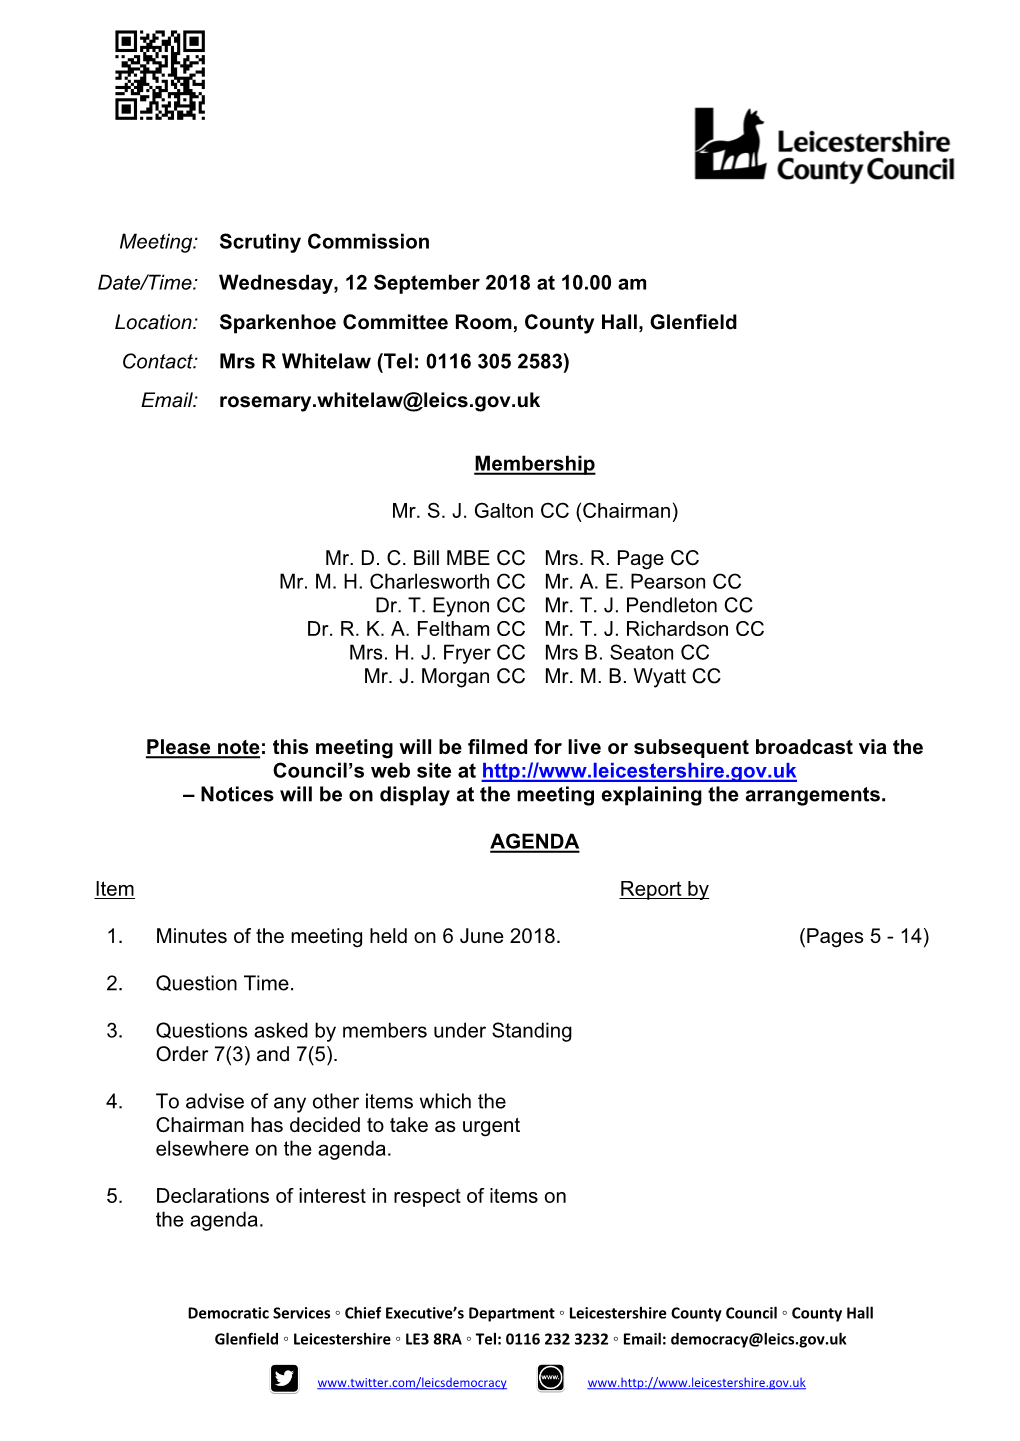 (Public Pack)Agenda Document for Scrutiny Commission, 12/09/2018